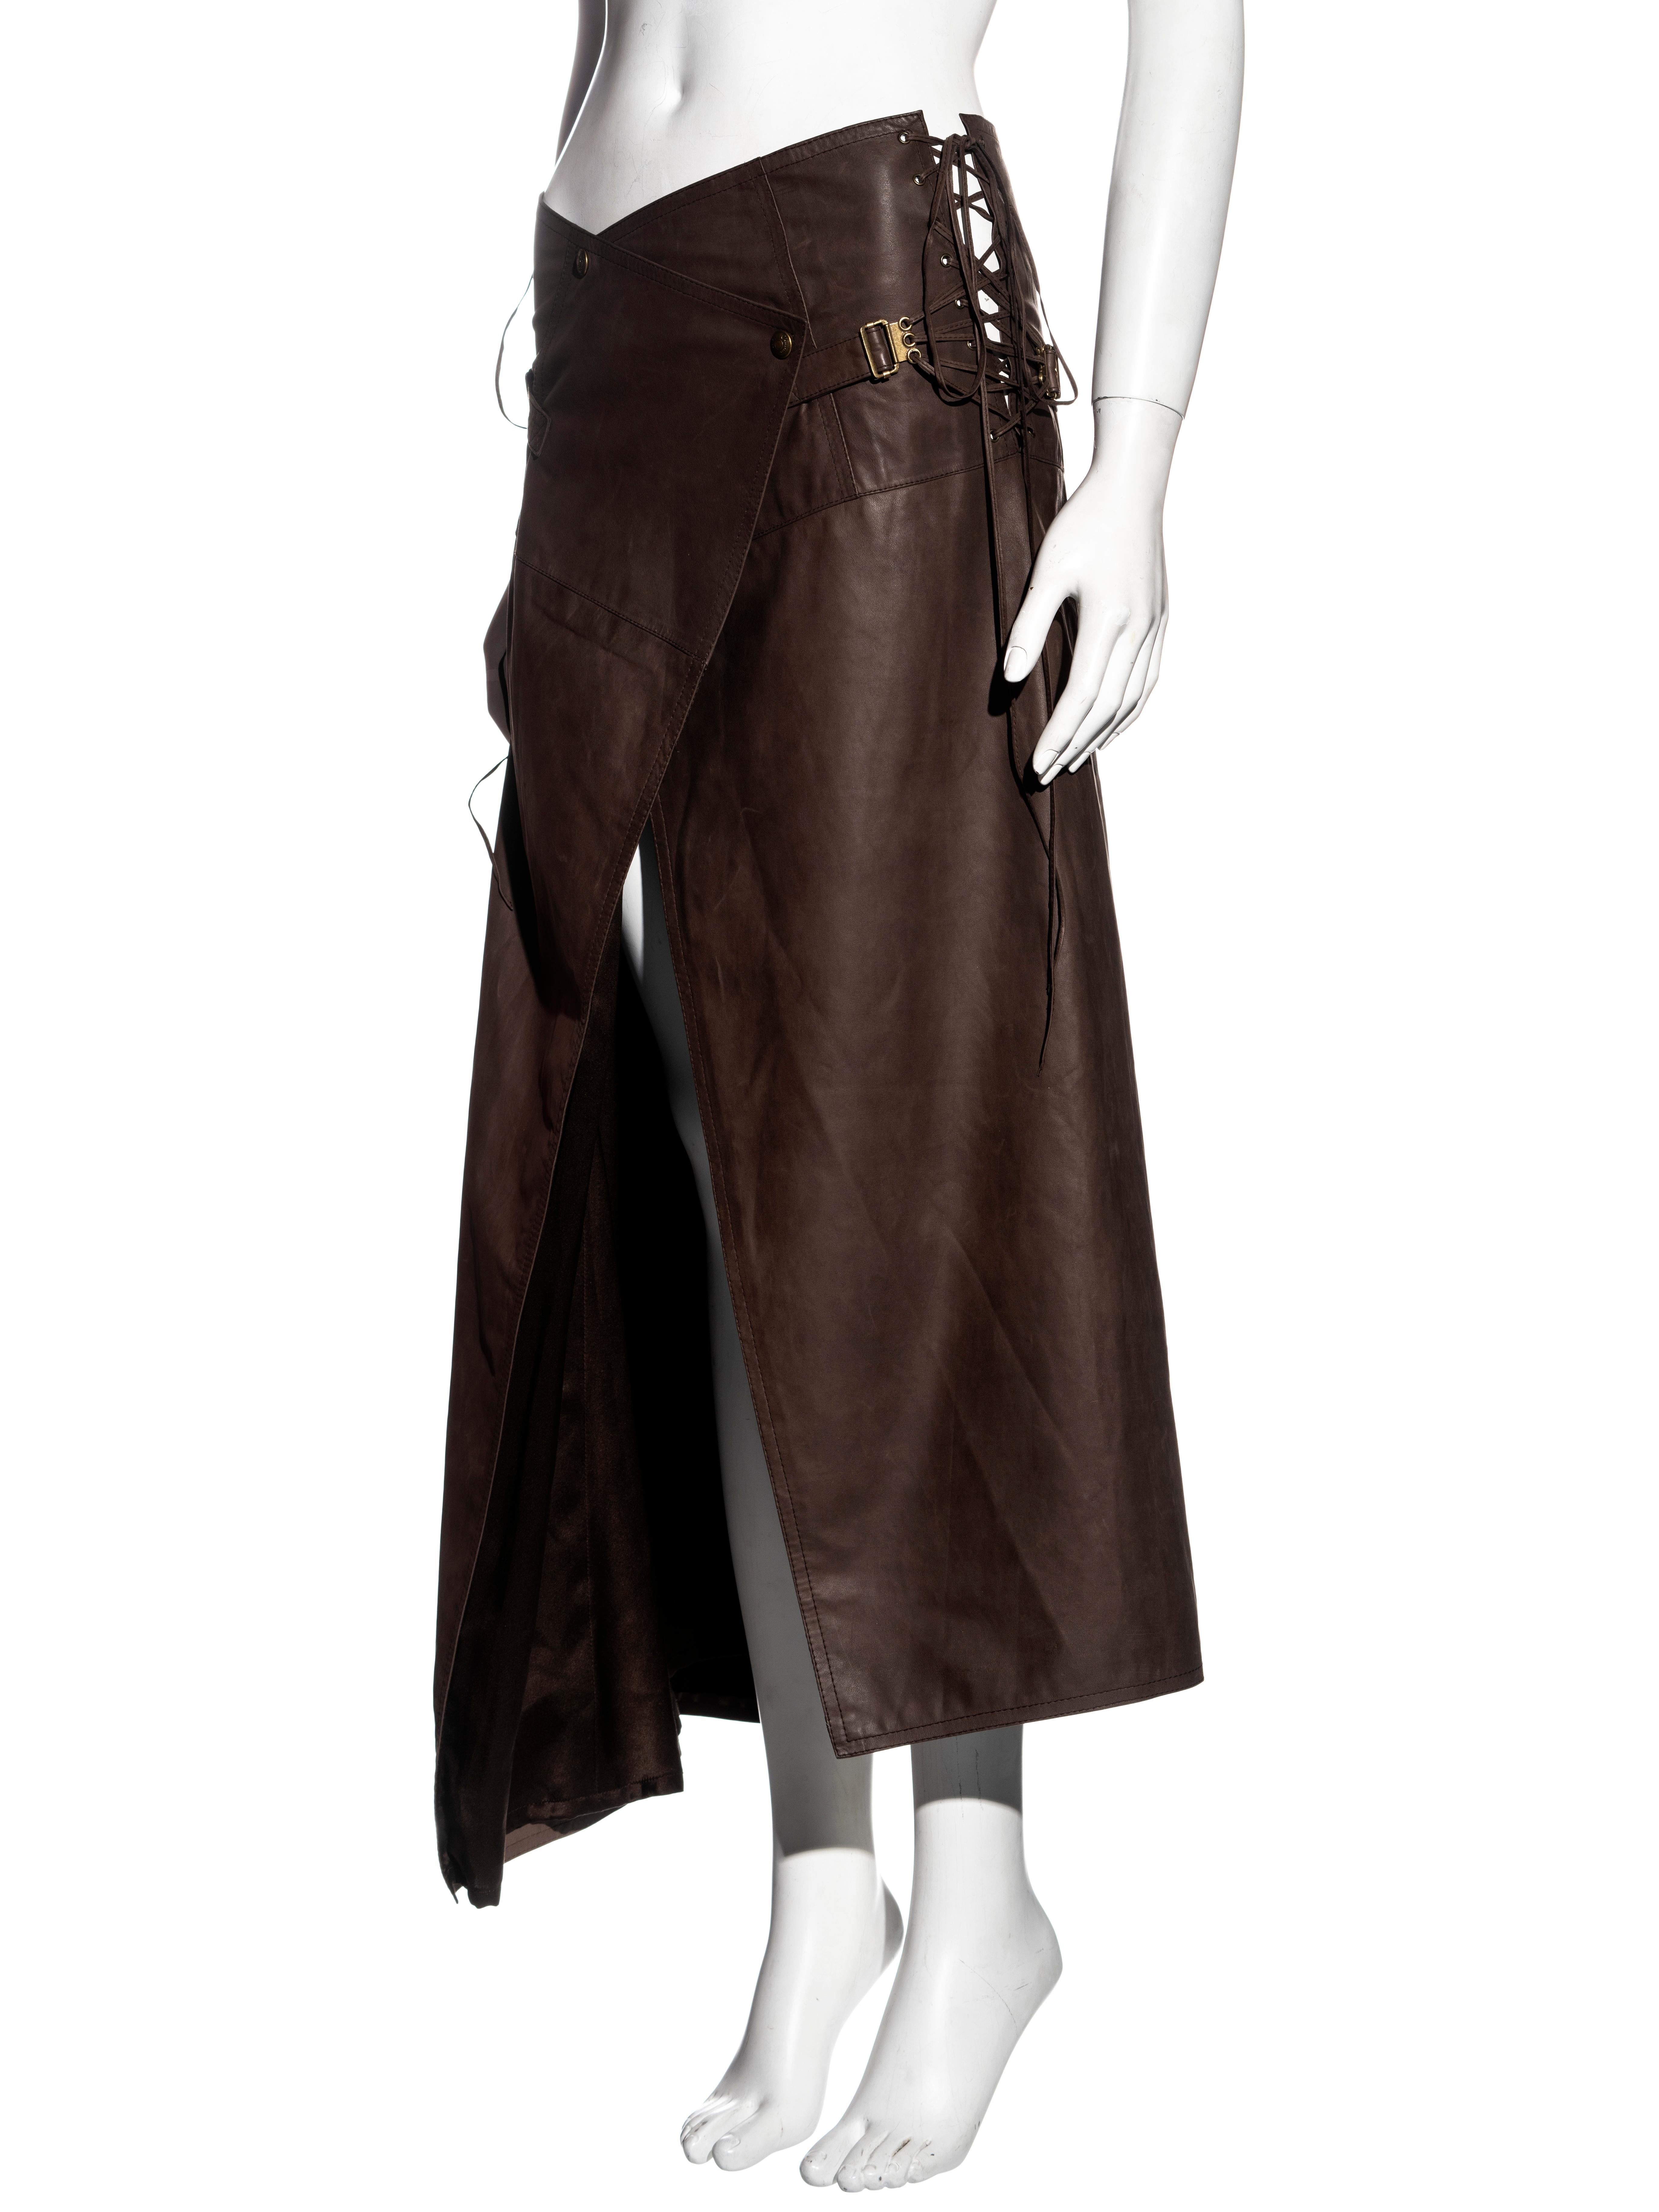 Women's Christian Dior by John Galliano brown leather wrap skirt, ss 2001